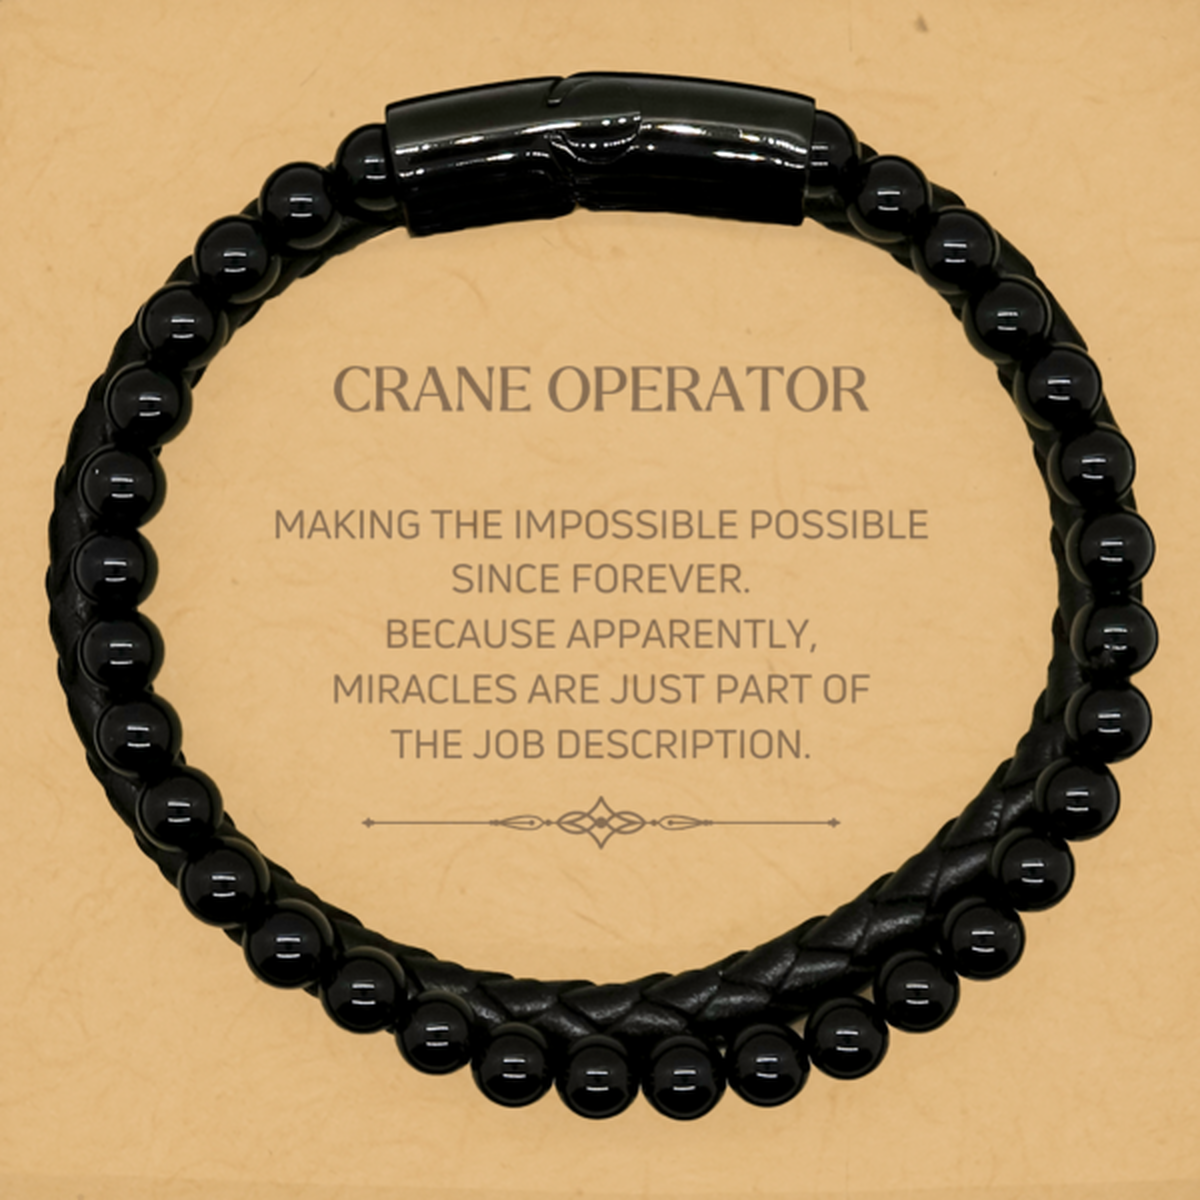 Funny Crane Operator Gifts, Miracles are just part of the job description, Inspirational Birthday Stone Leather Bracelets For Crane Operator, Men, Women, Coworkers, Friends, Boss